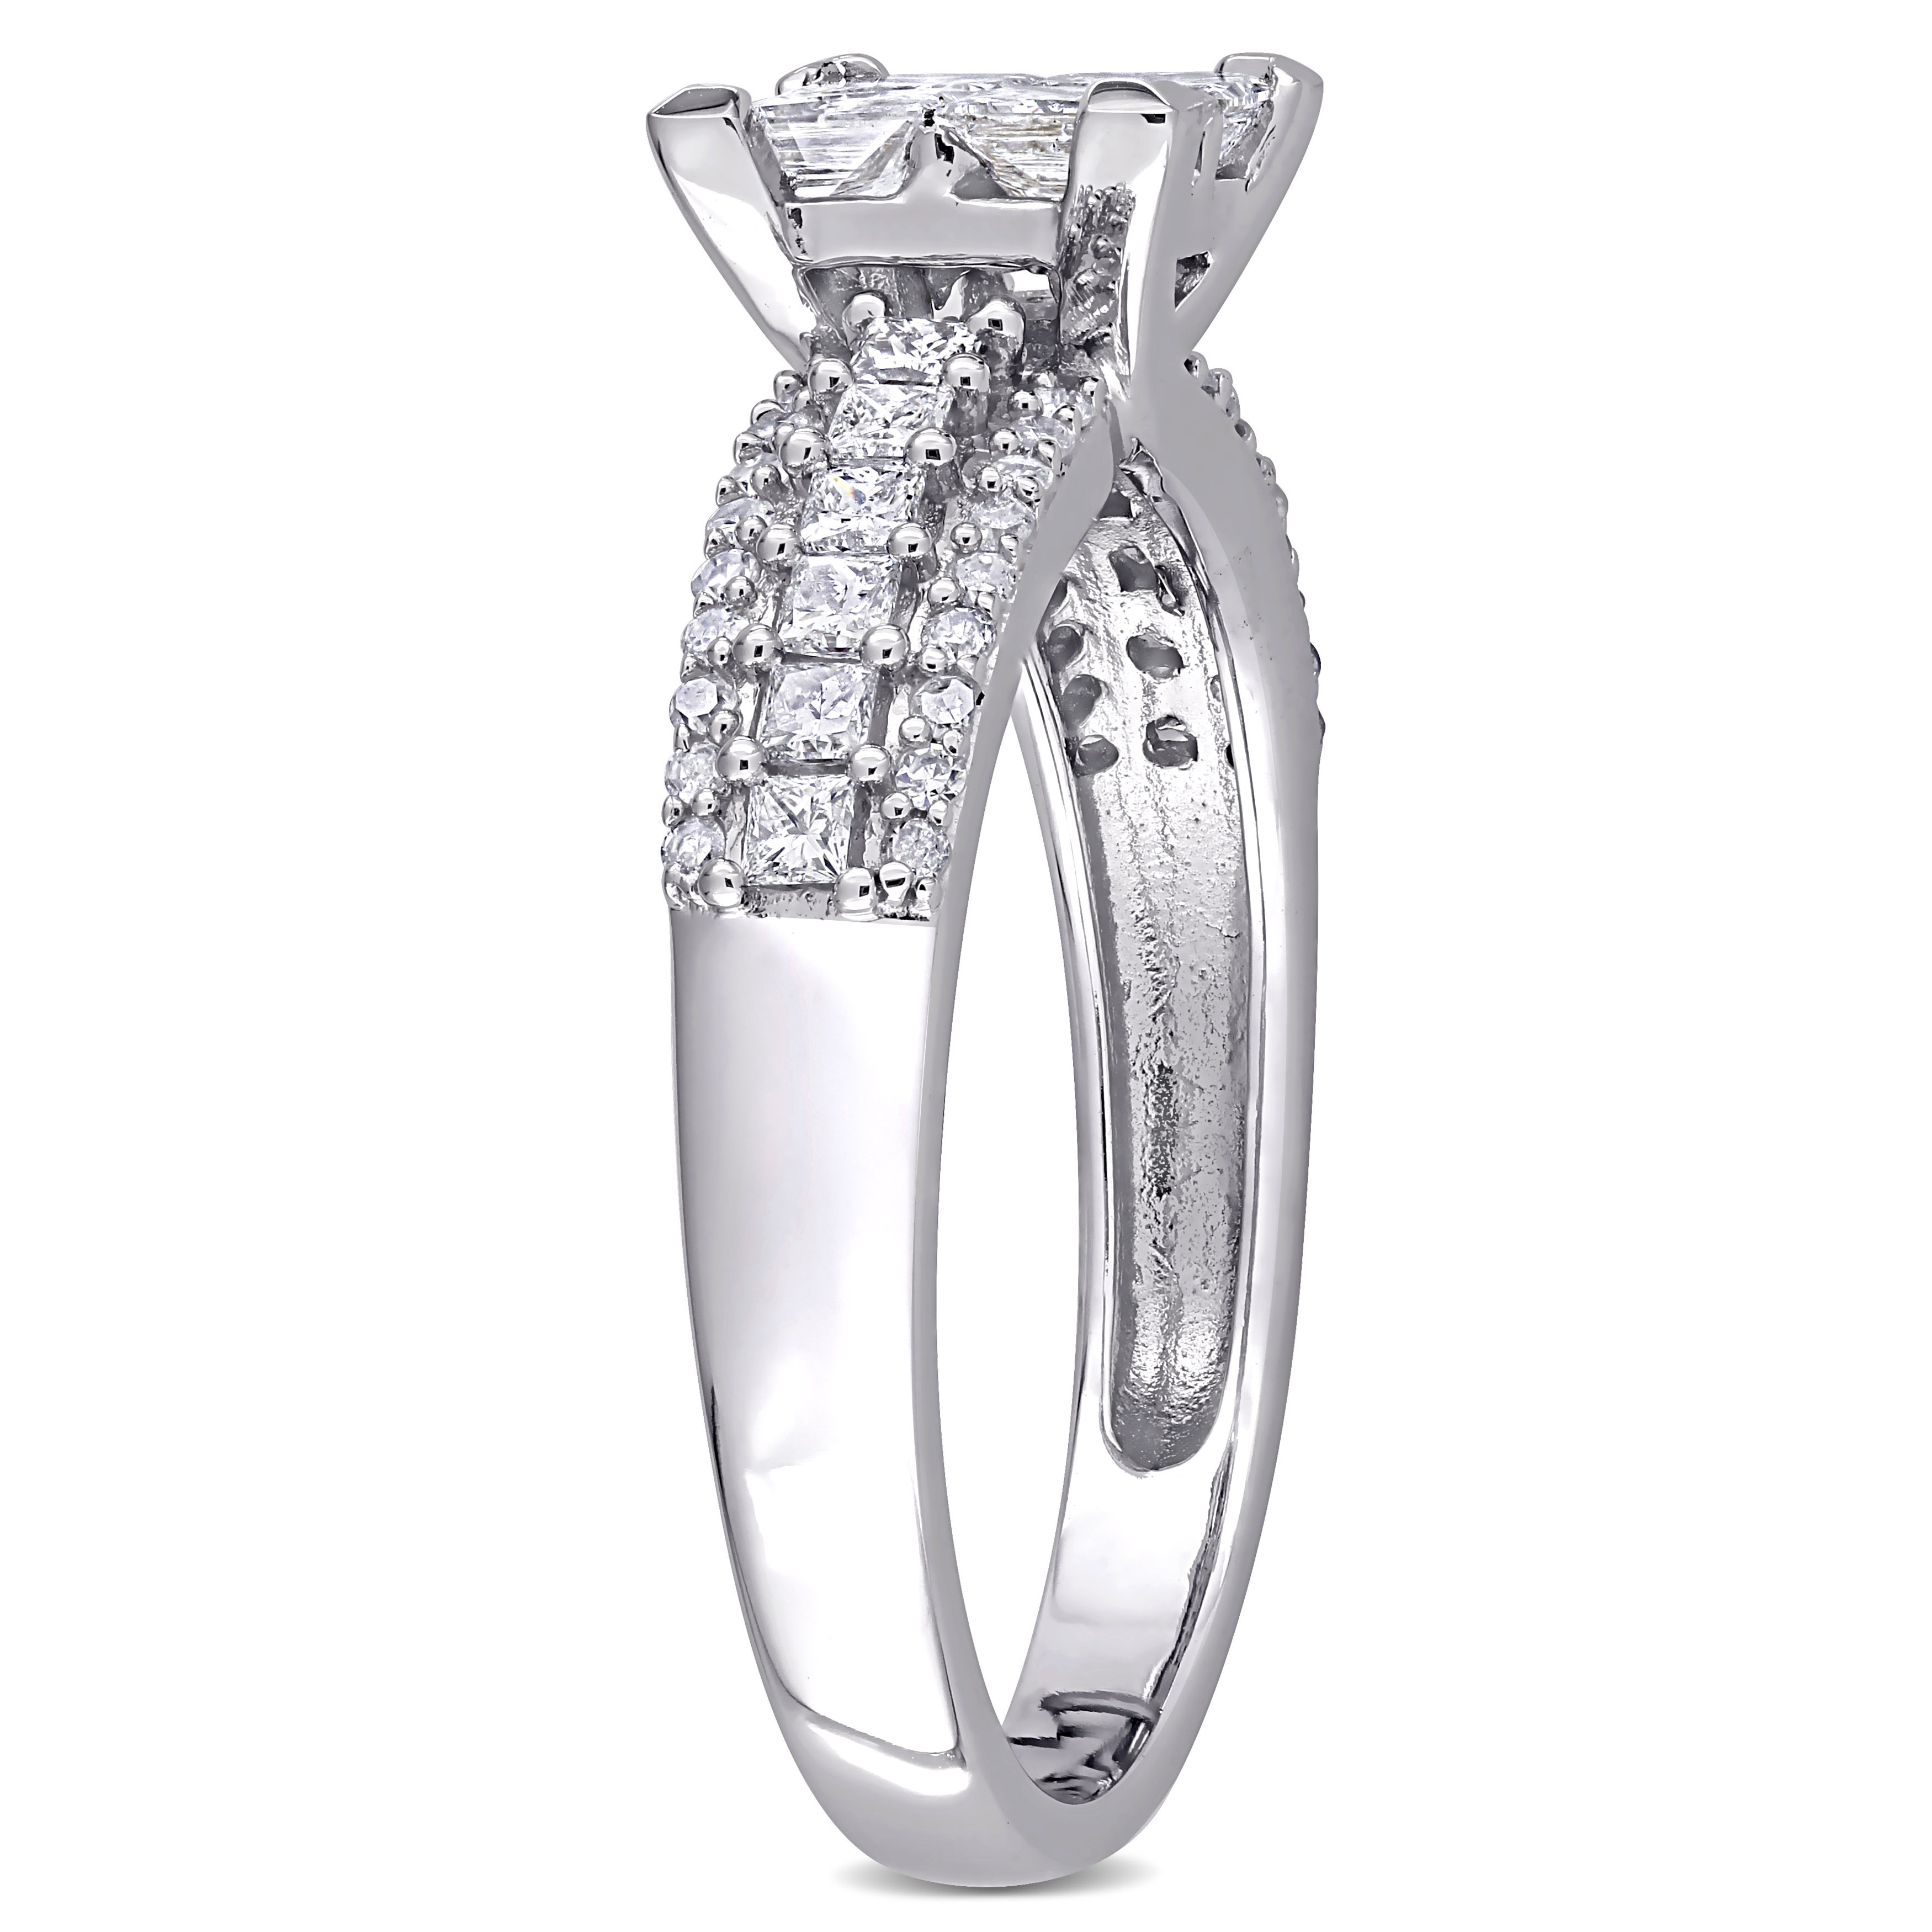 1 CT TW Princess and Round-Cut Diamond Engagement Ring in 10k White Gold